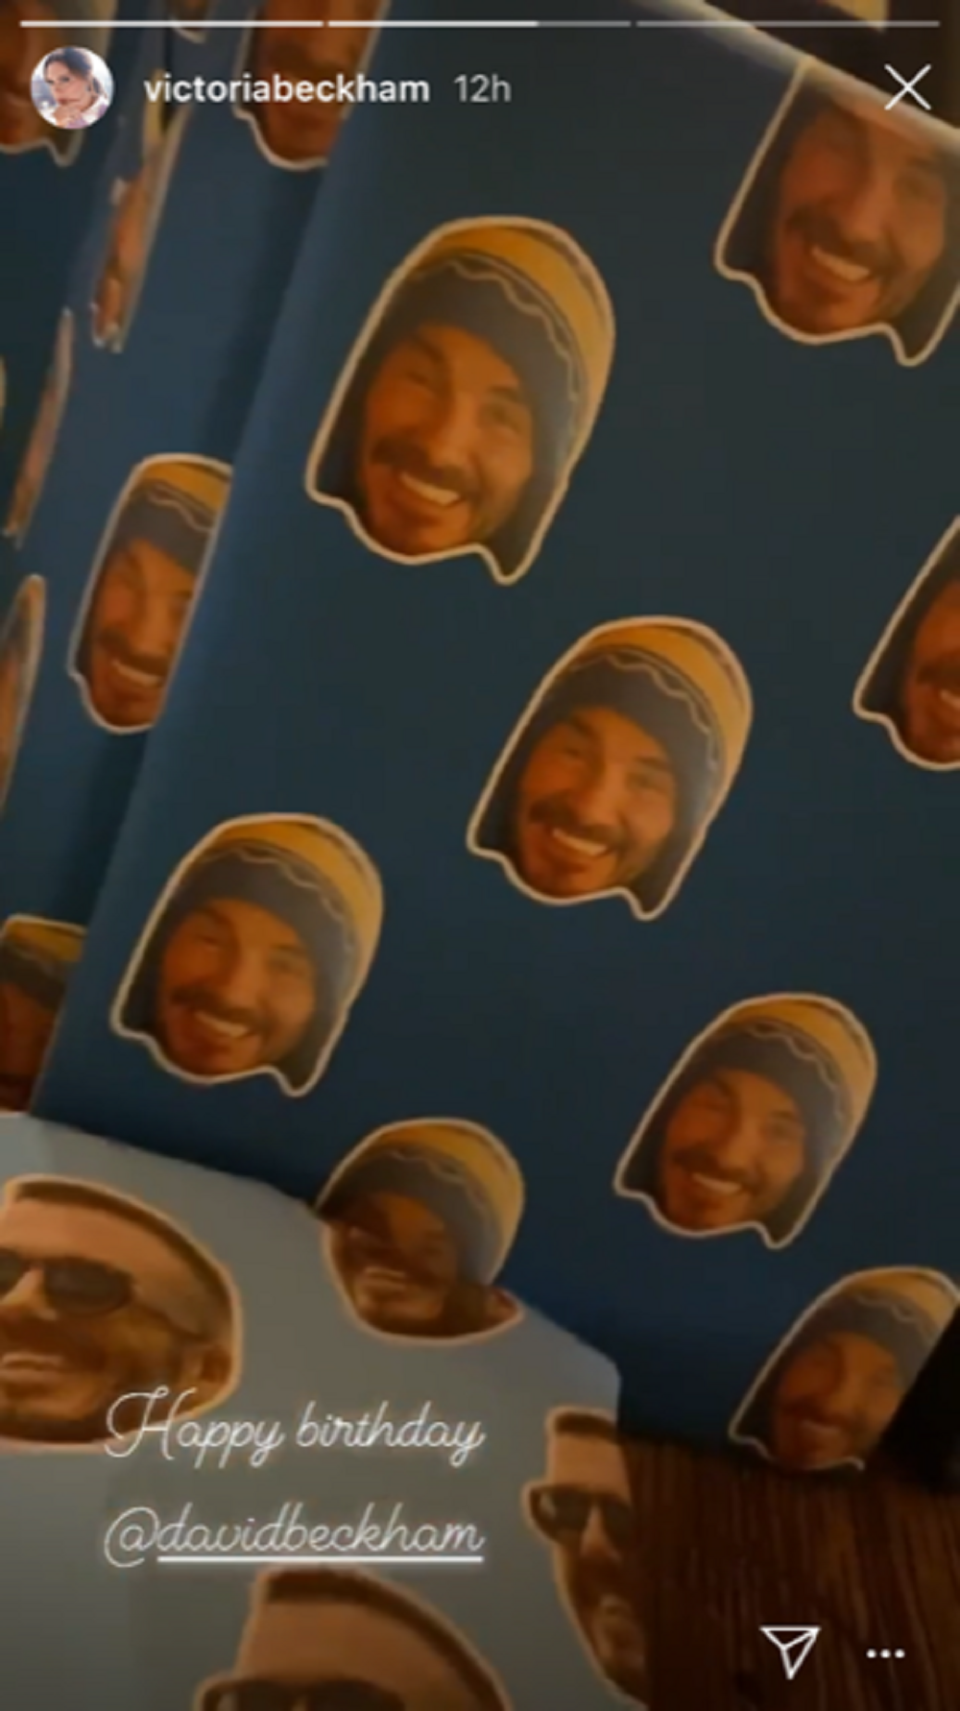 The wrapping paper featuring David Beckham’s face (Victoria Beckham/Instagram Stories)